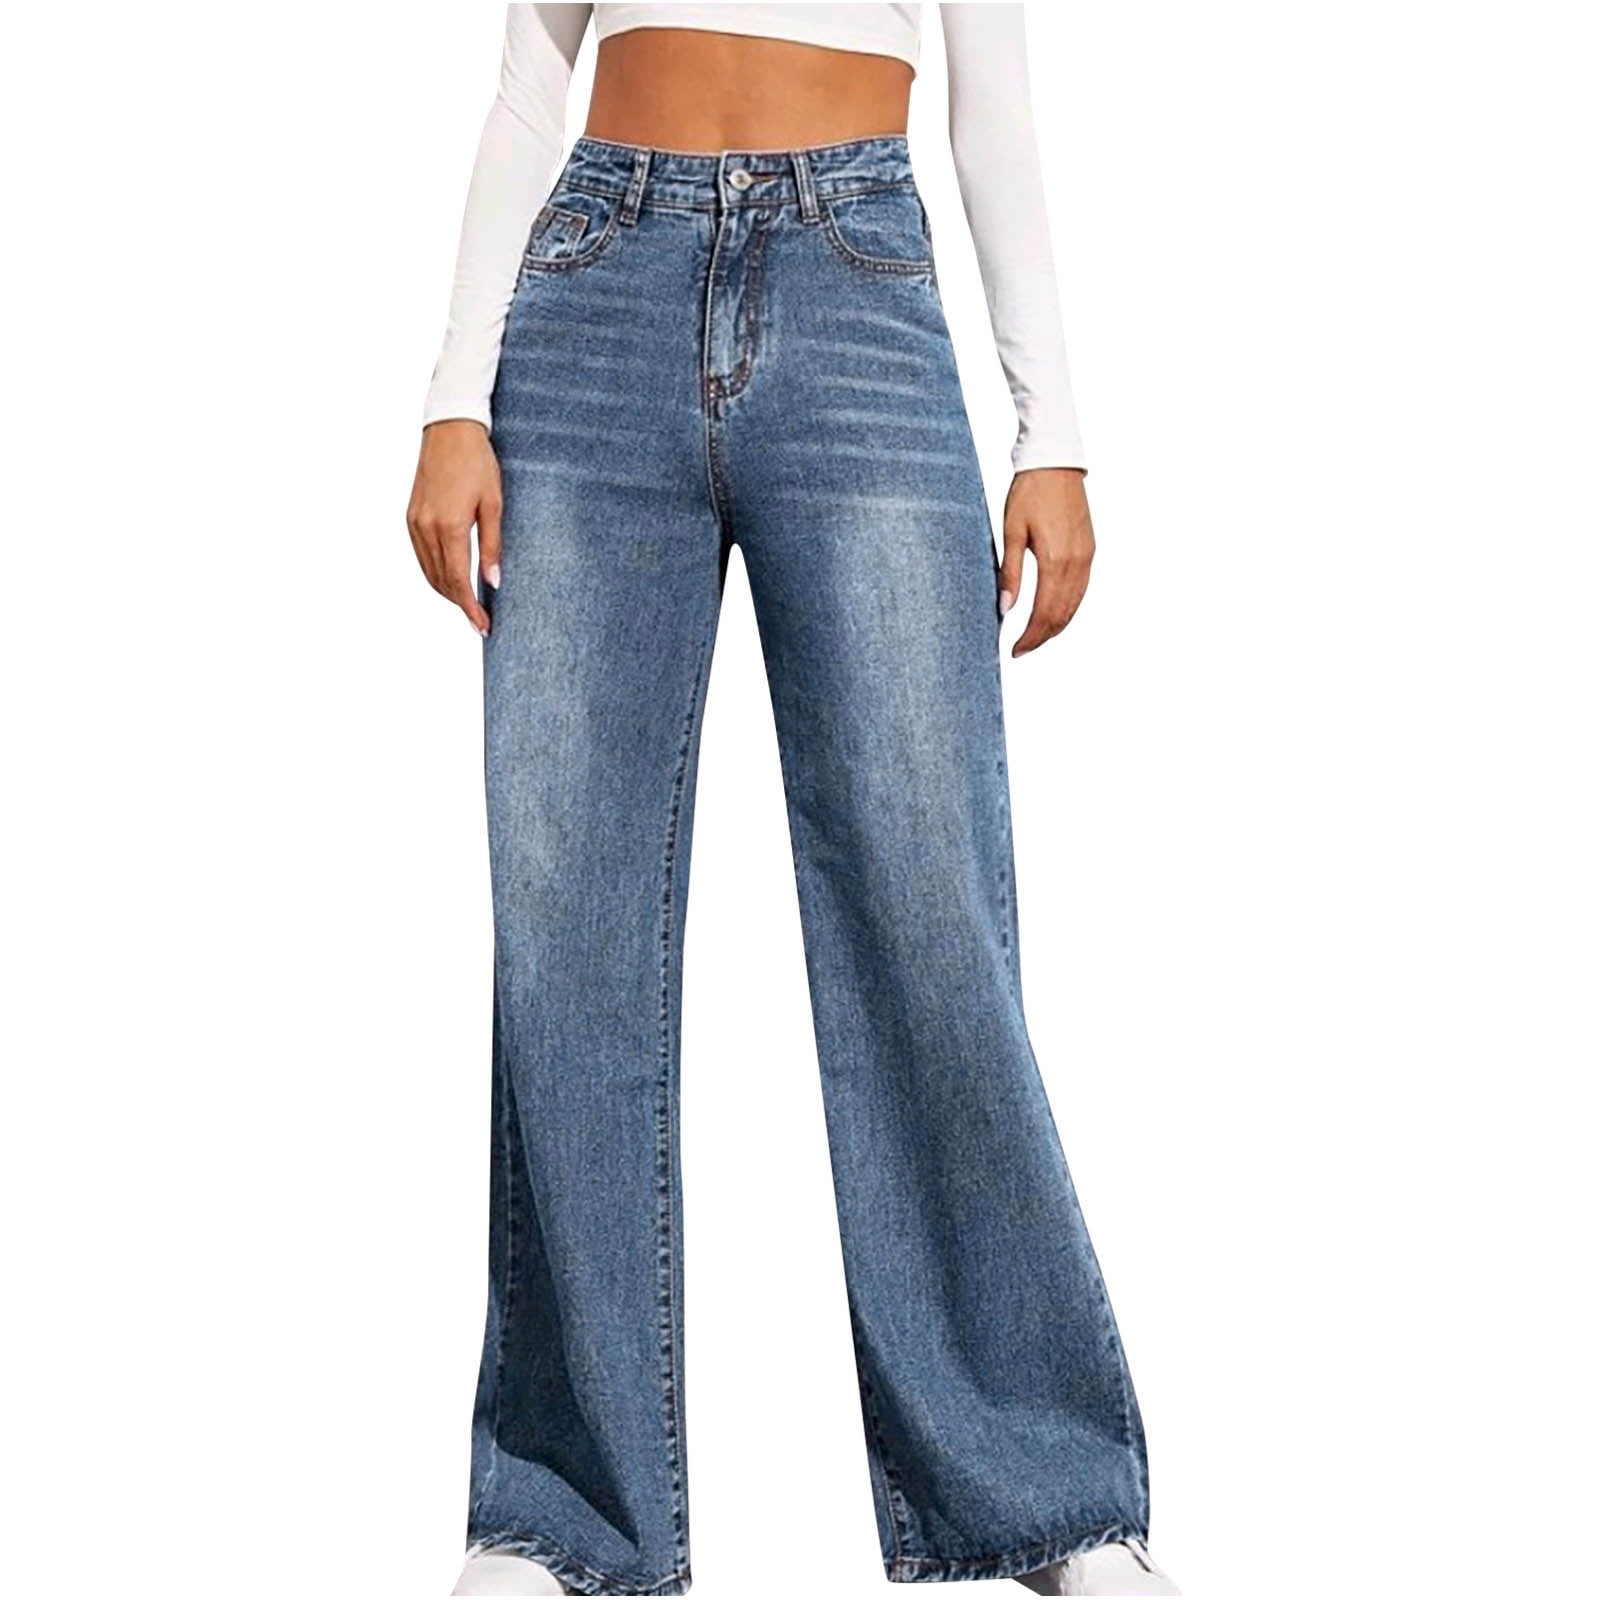 Women's High Waisted Wide Leg Jeans Casual Loose Denim Pants Classic ...